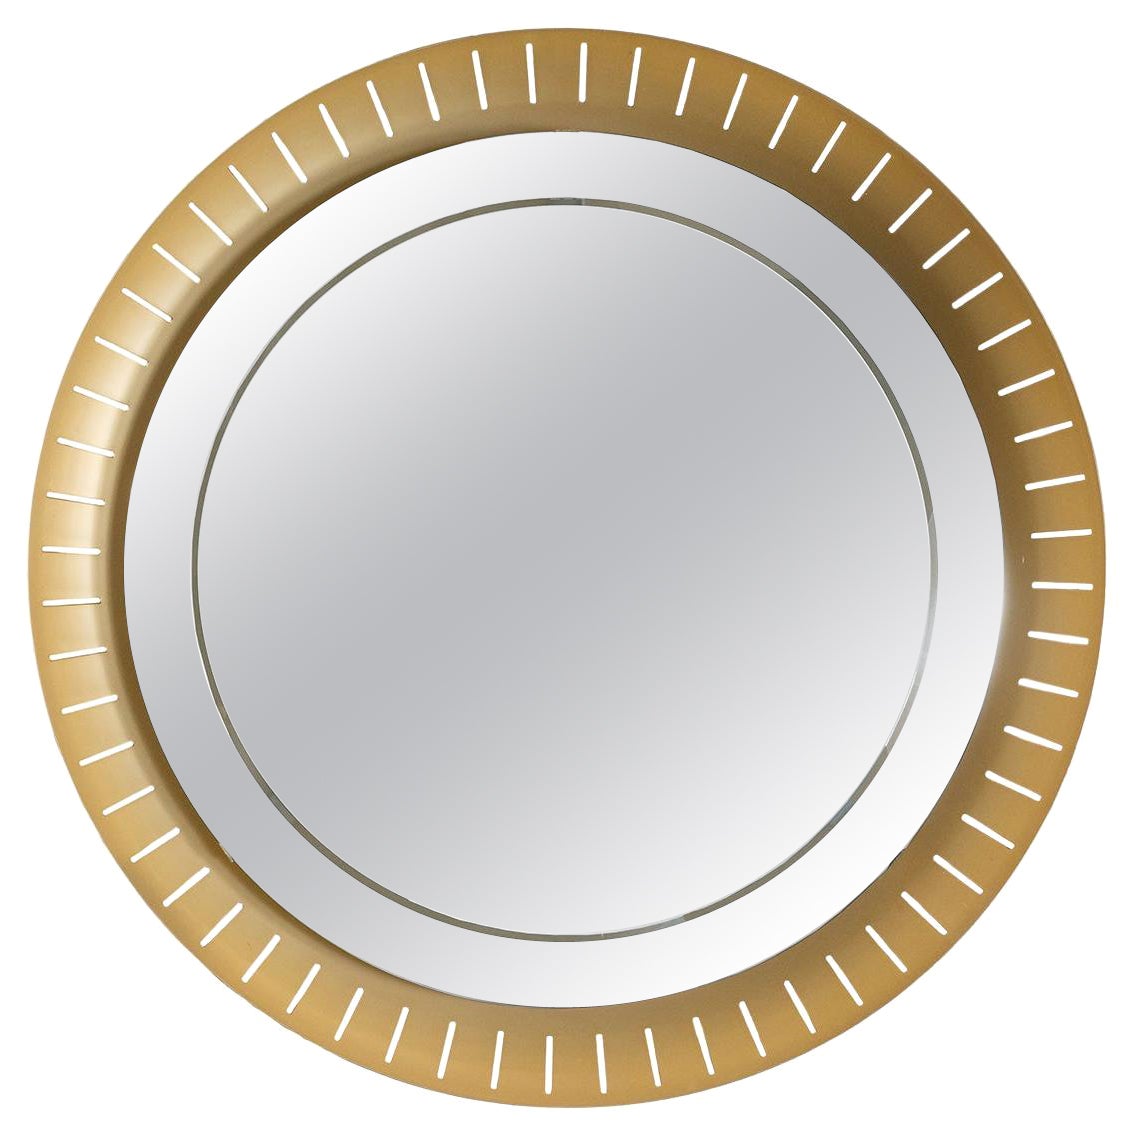 Perforated Brass Backlit Mirror by Hillebrand For Sale